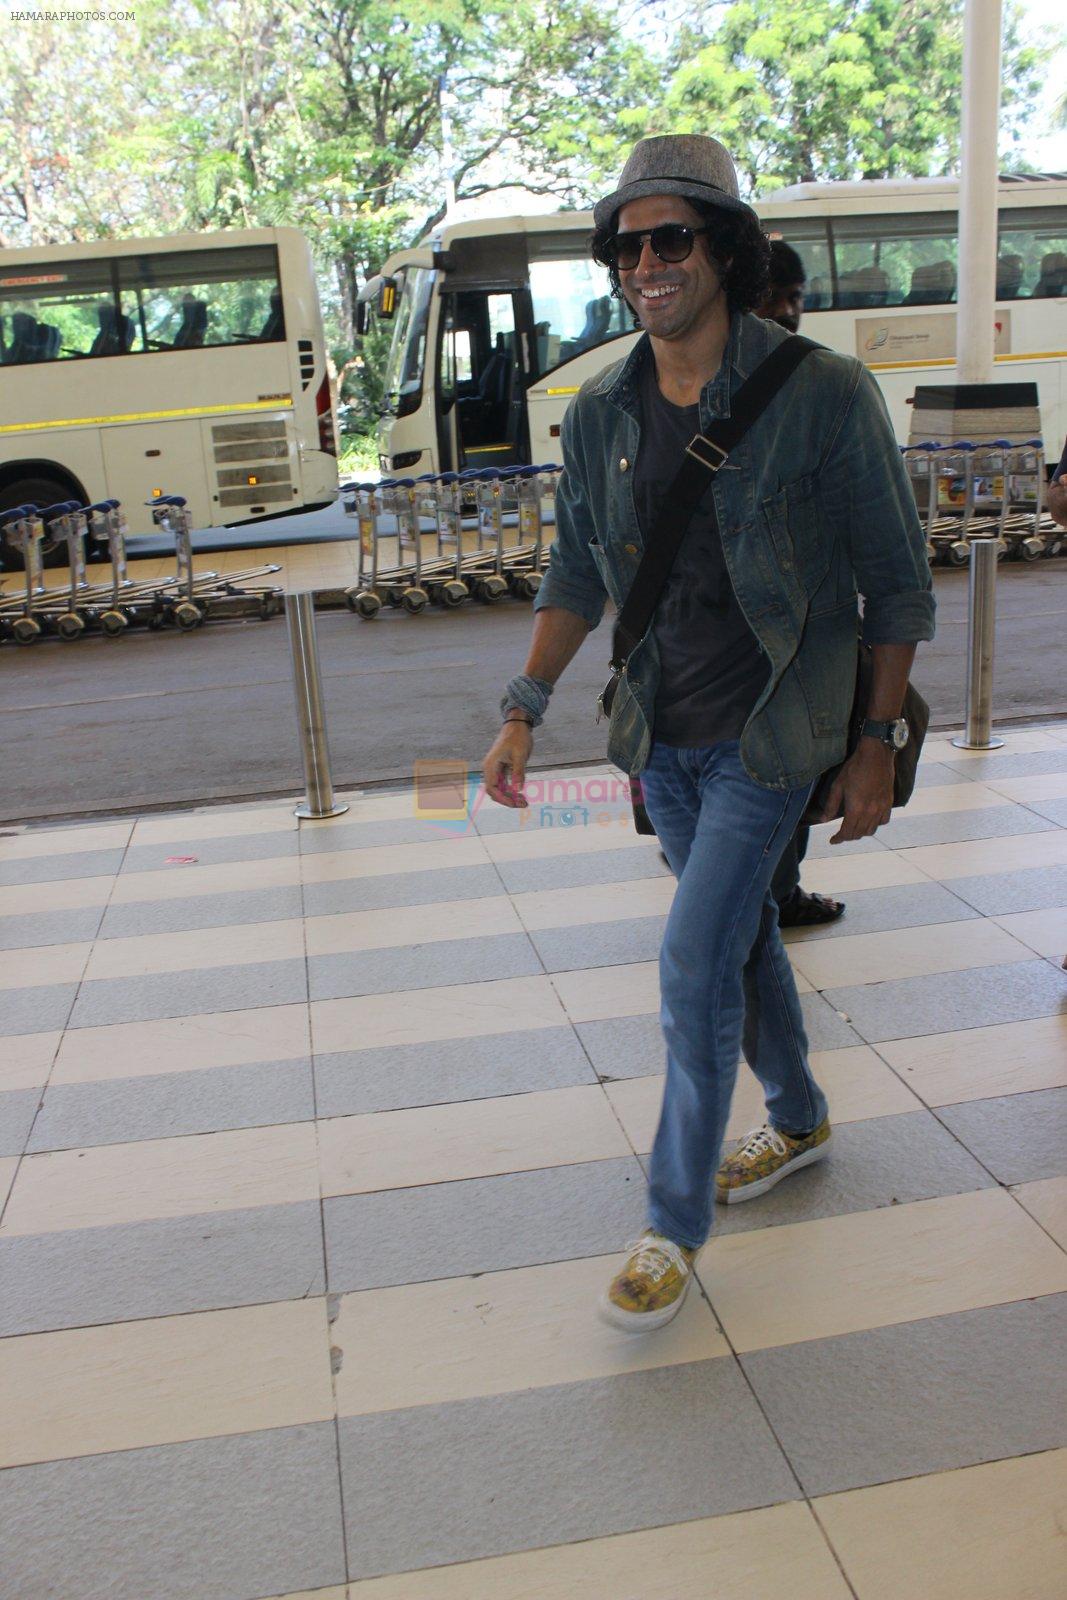 Farhan Akhtar snapped at airport on 5th March 2016